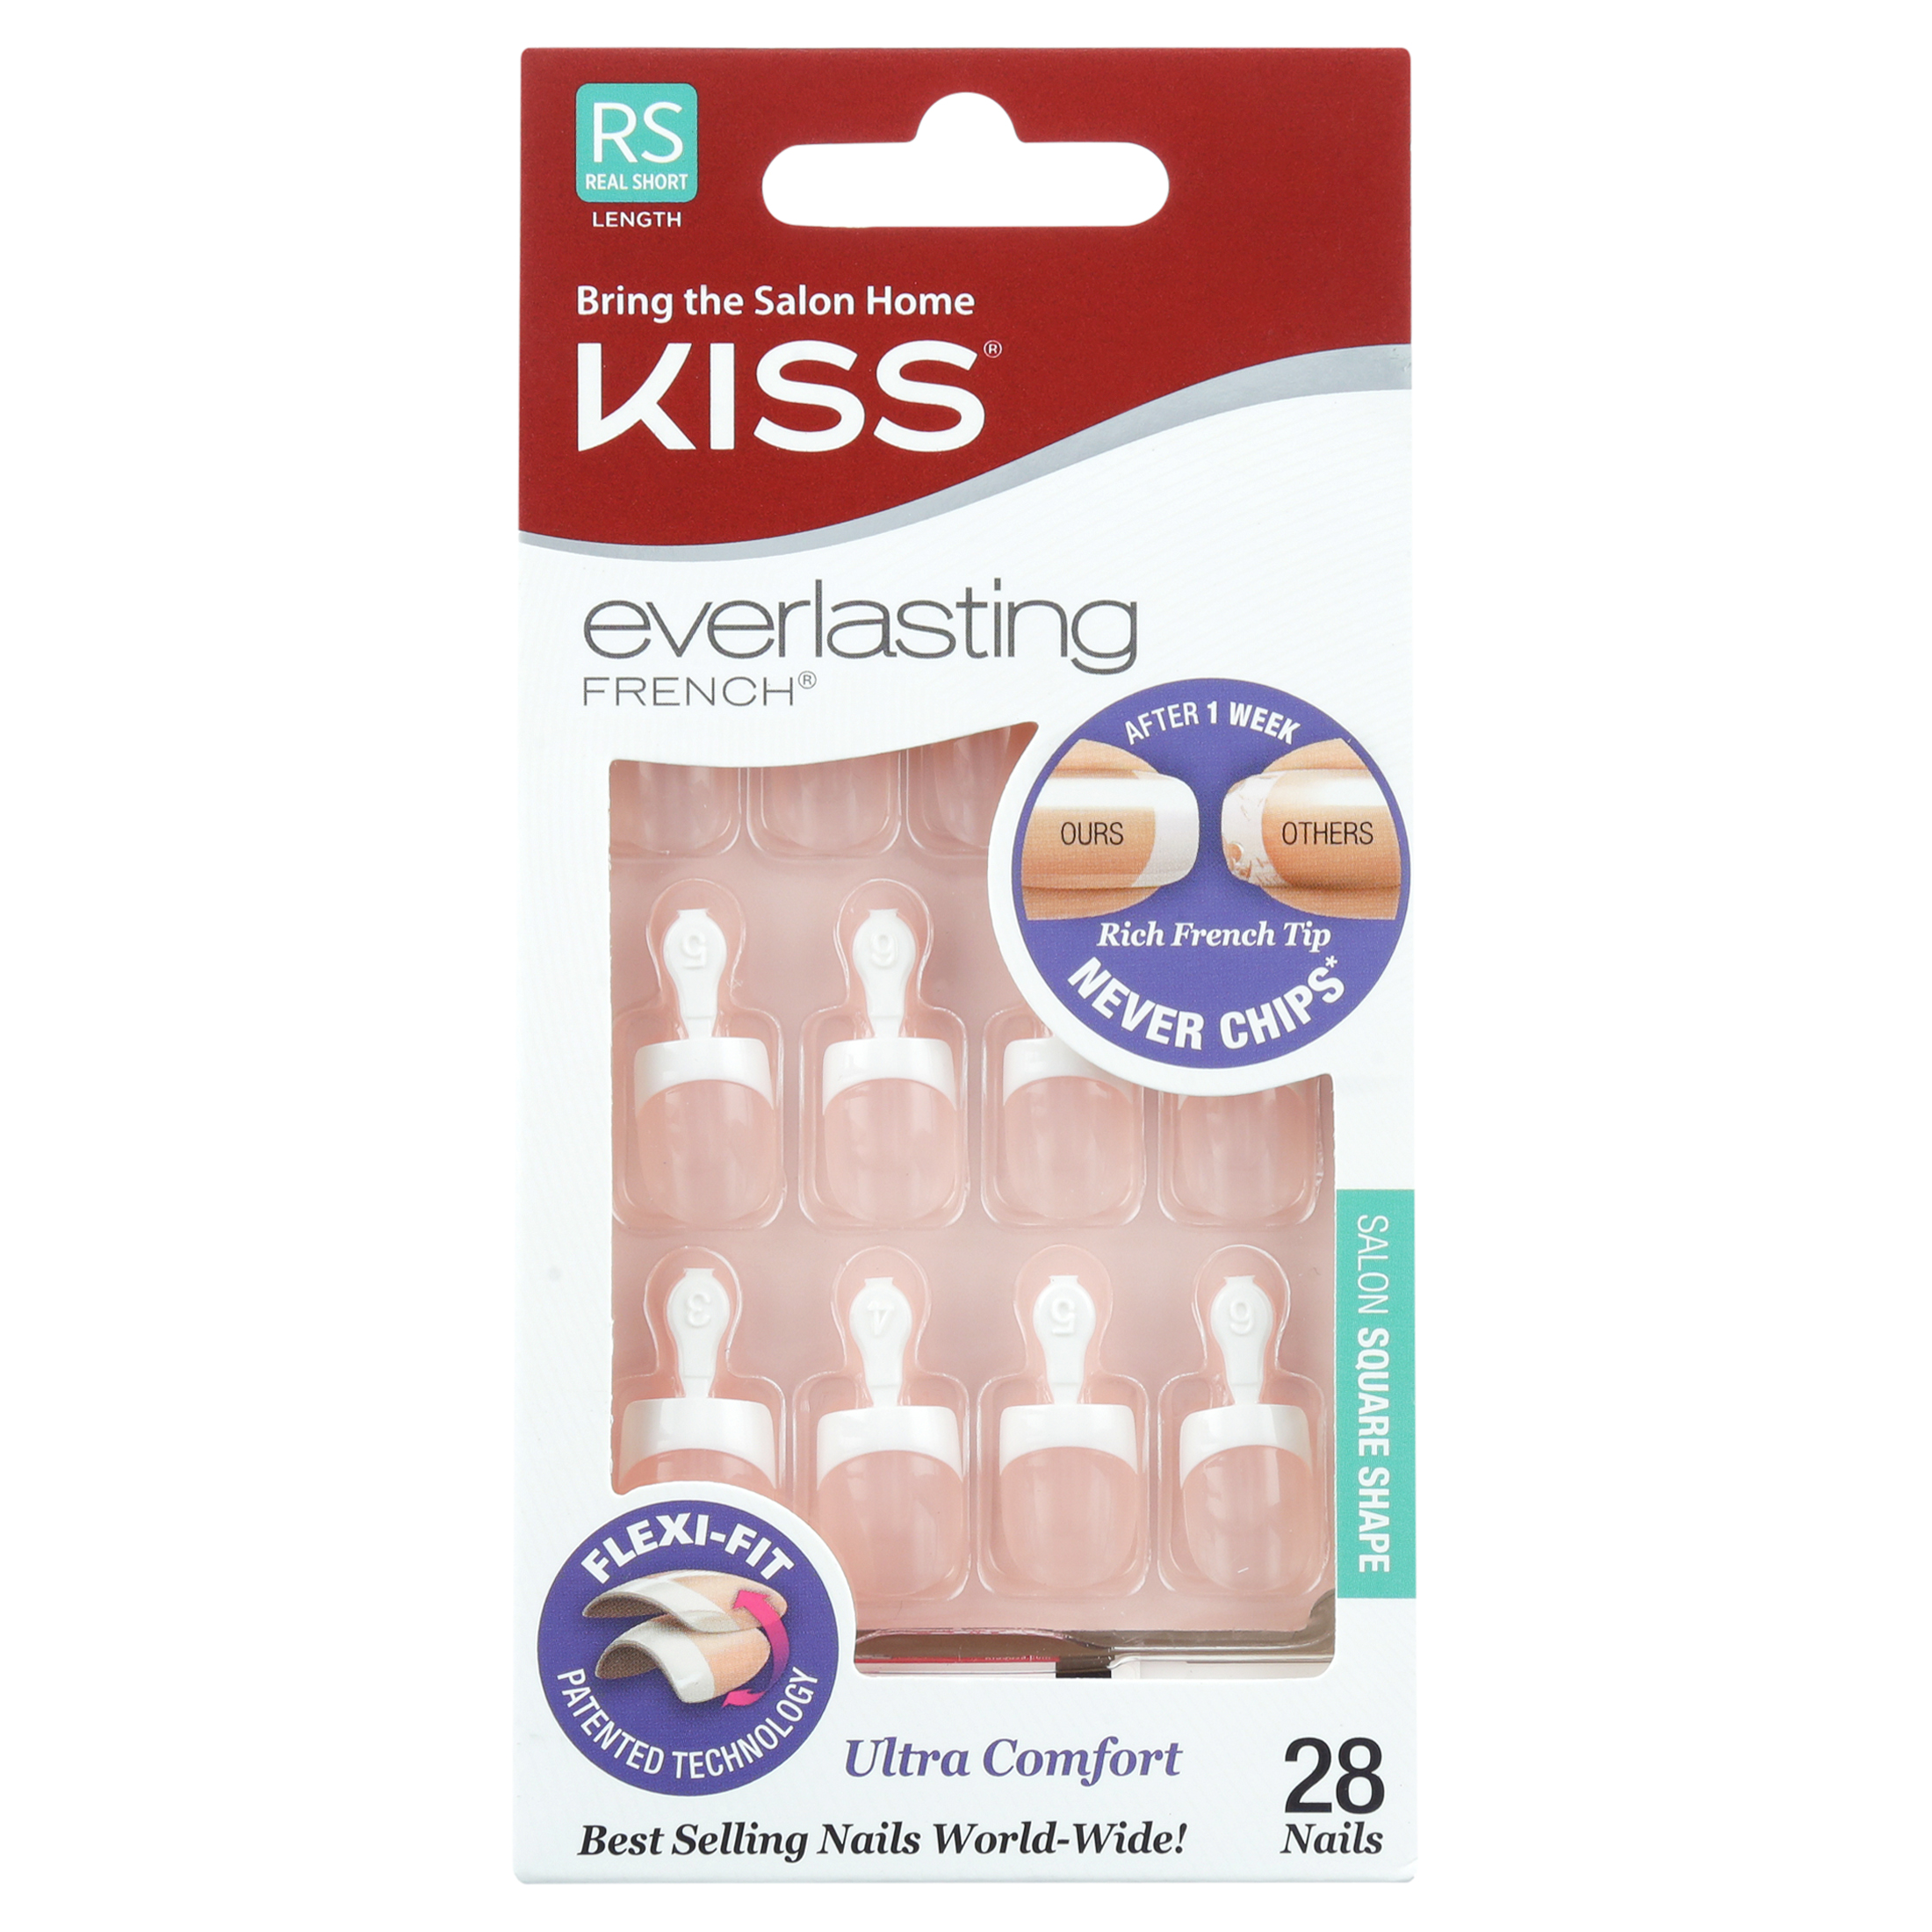 Kiss Everlasting French Nails - Clear Pink - image 5 of 9